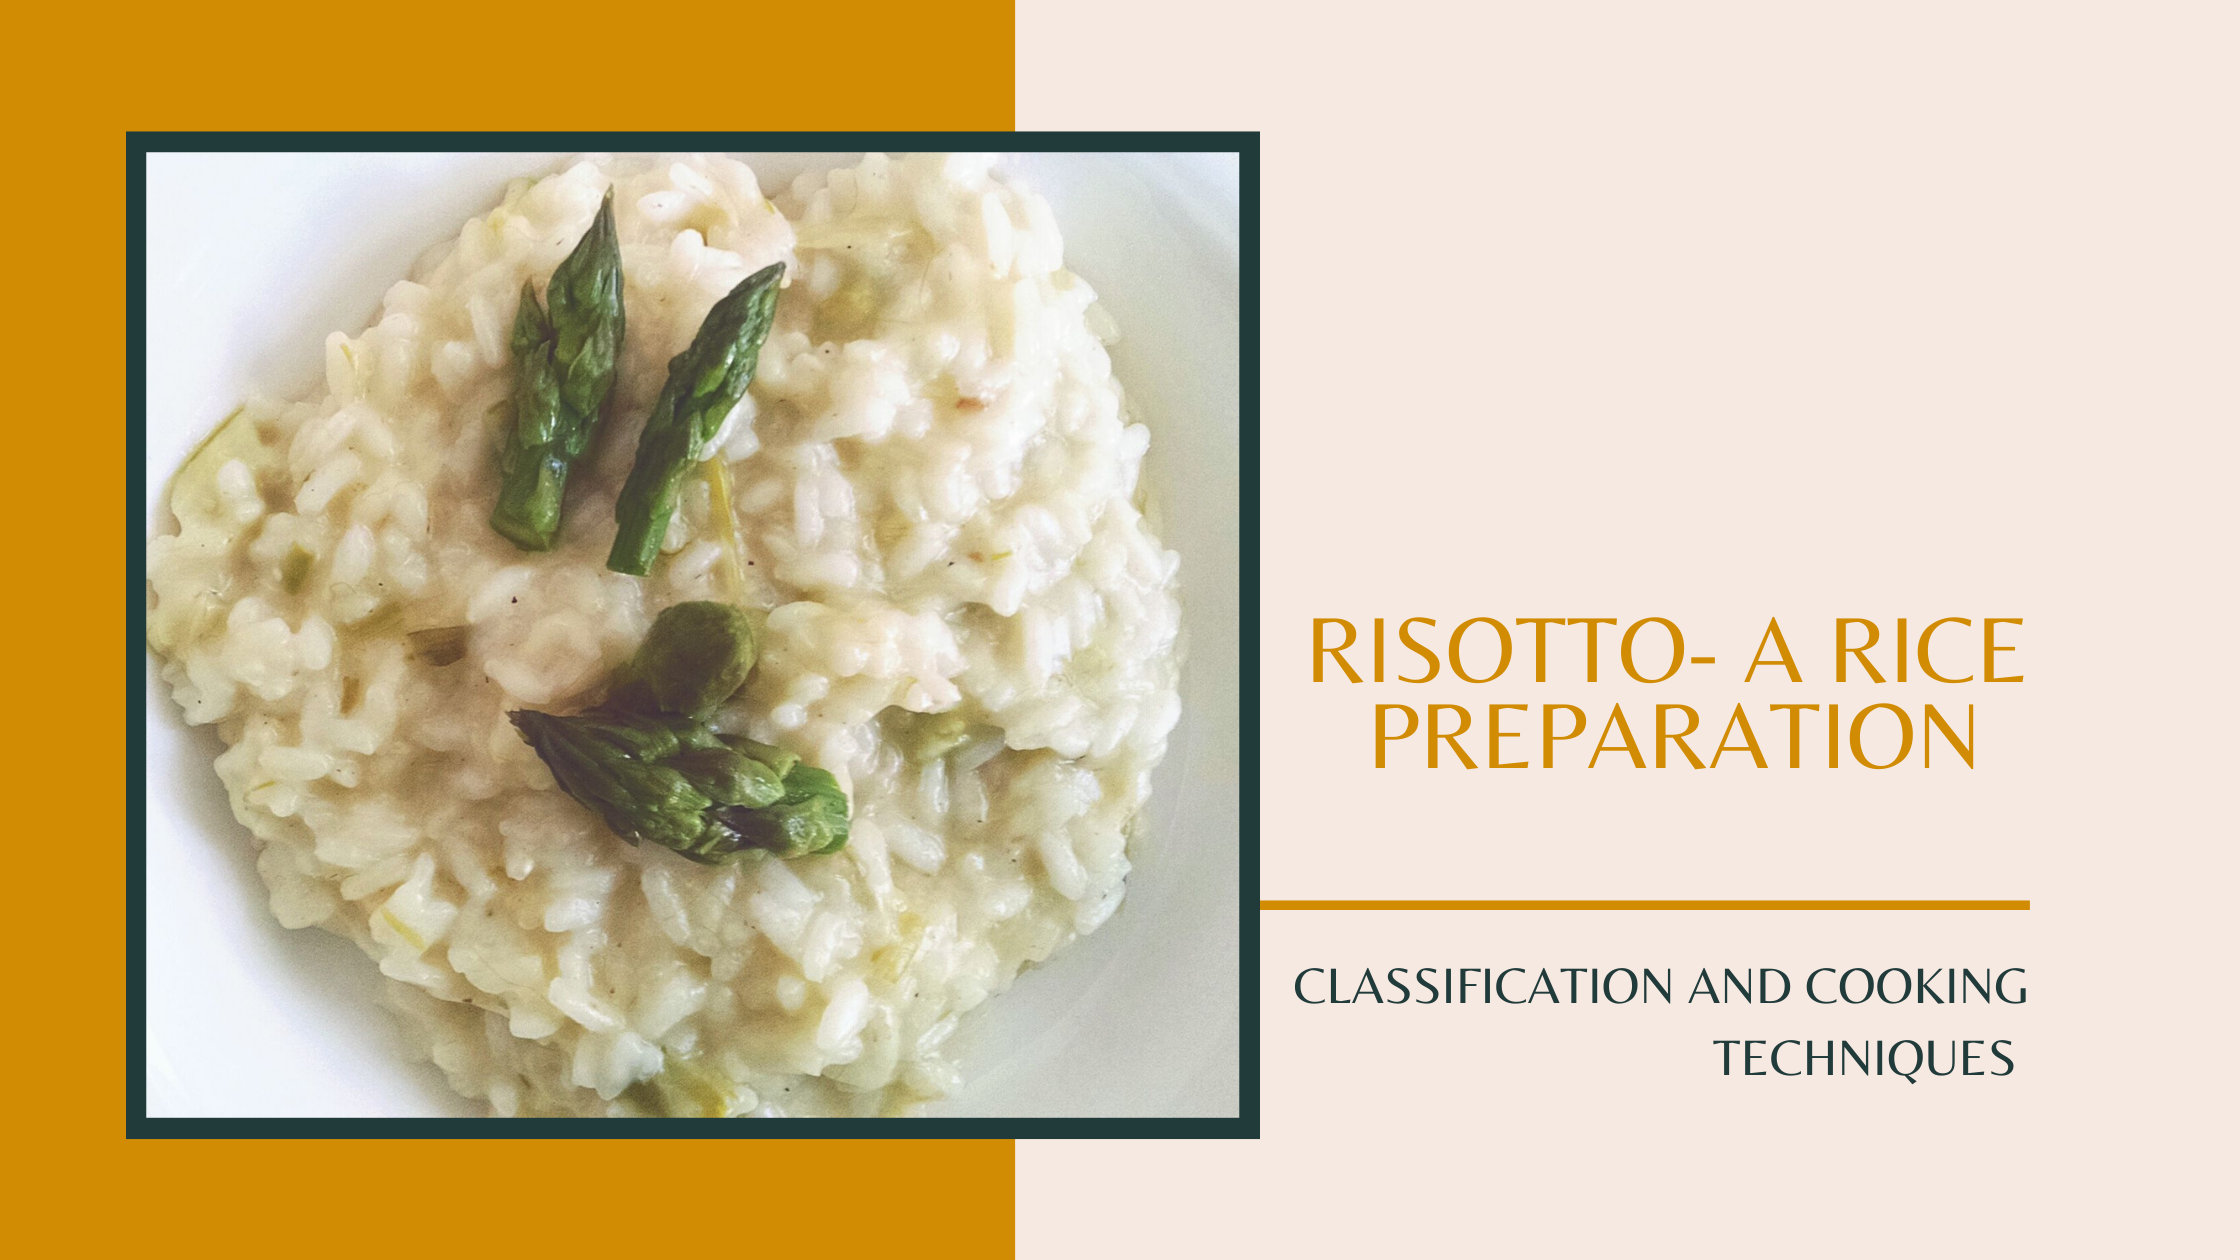 Risotto by Chef Ankit gaurav